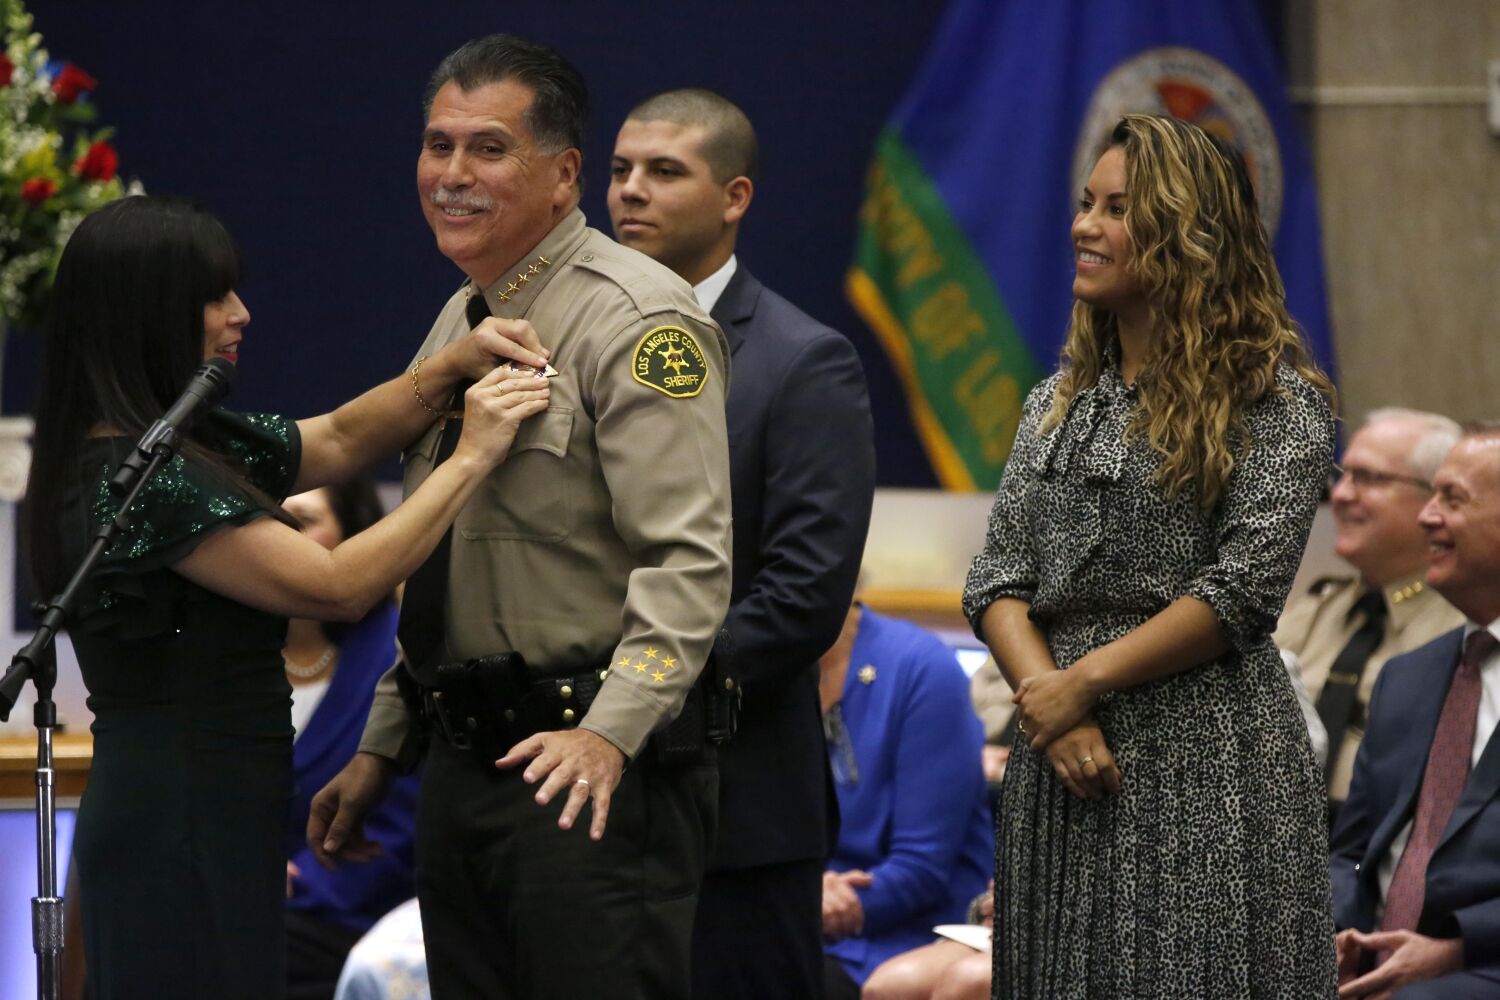 Robert Luna is sworn in as L.A. County's new sheriff, replacing controversial predecessor